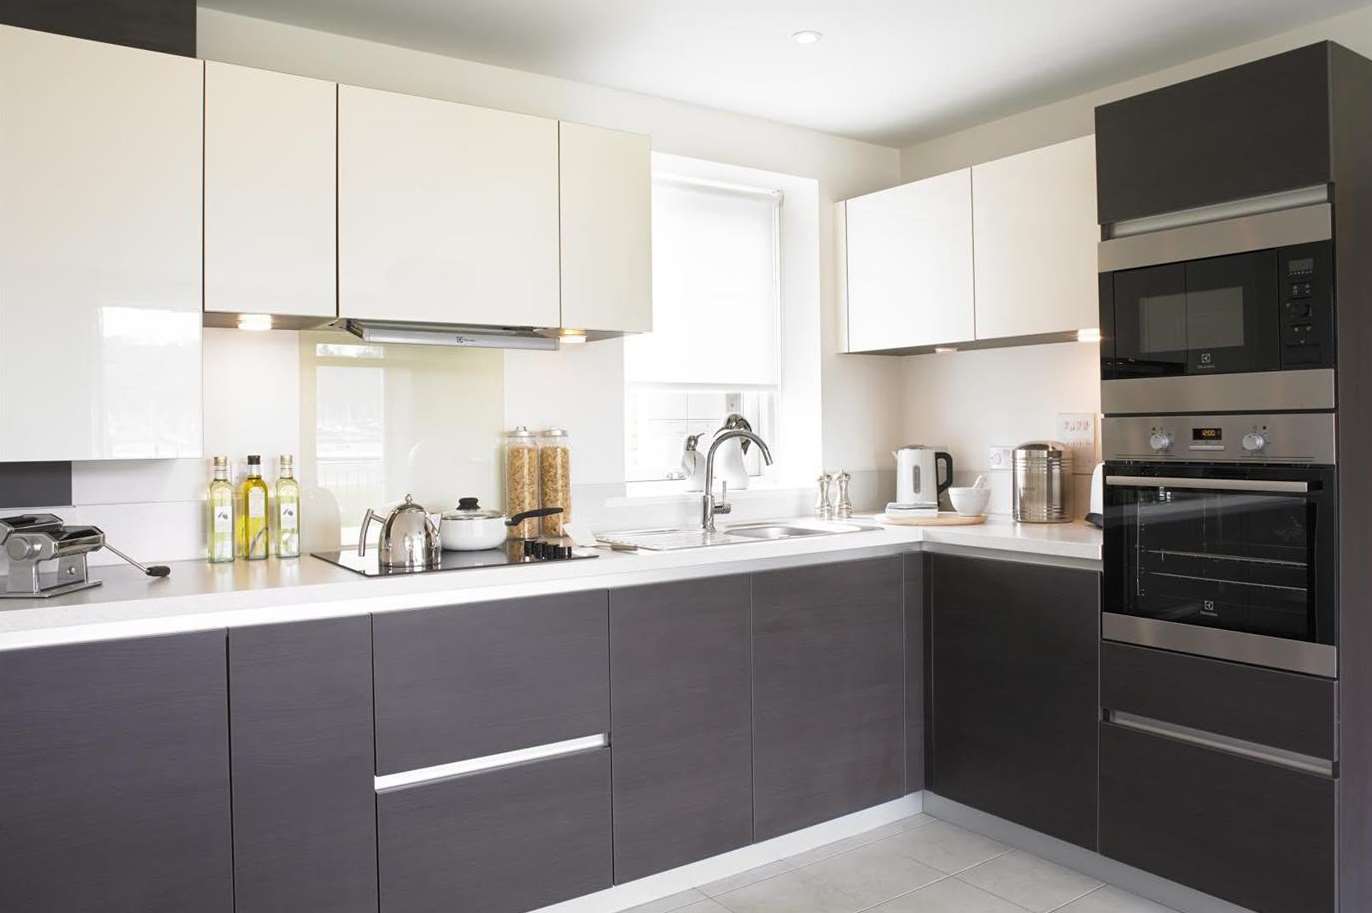 The kitchen area of the apartments at St Mary's Island, Chatham